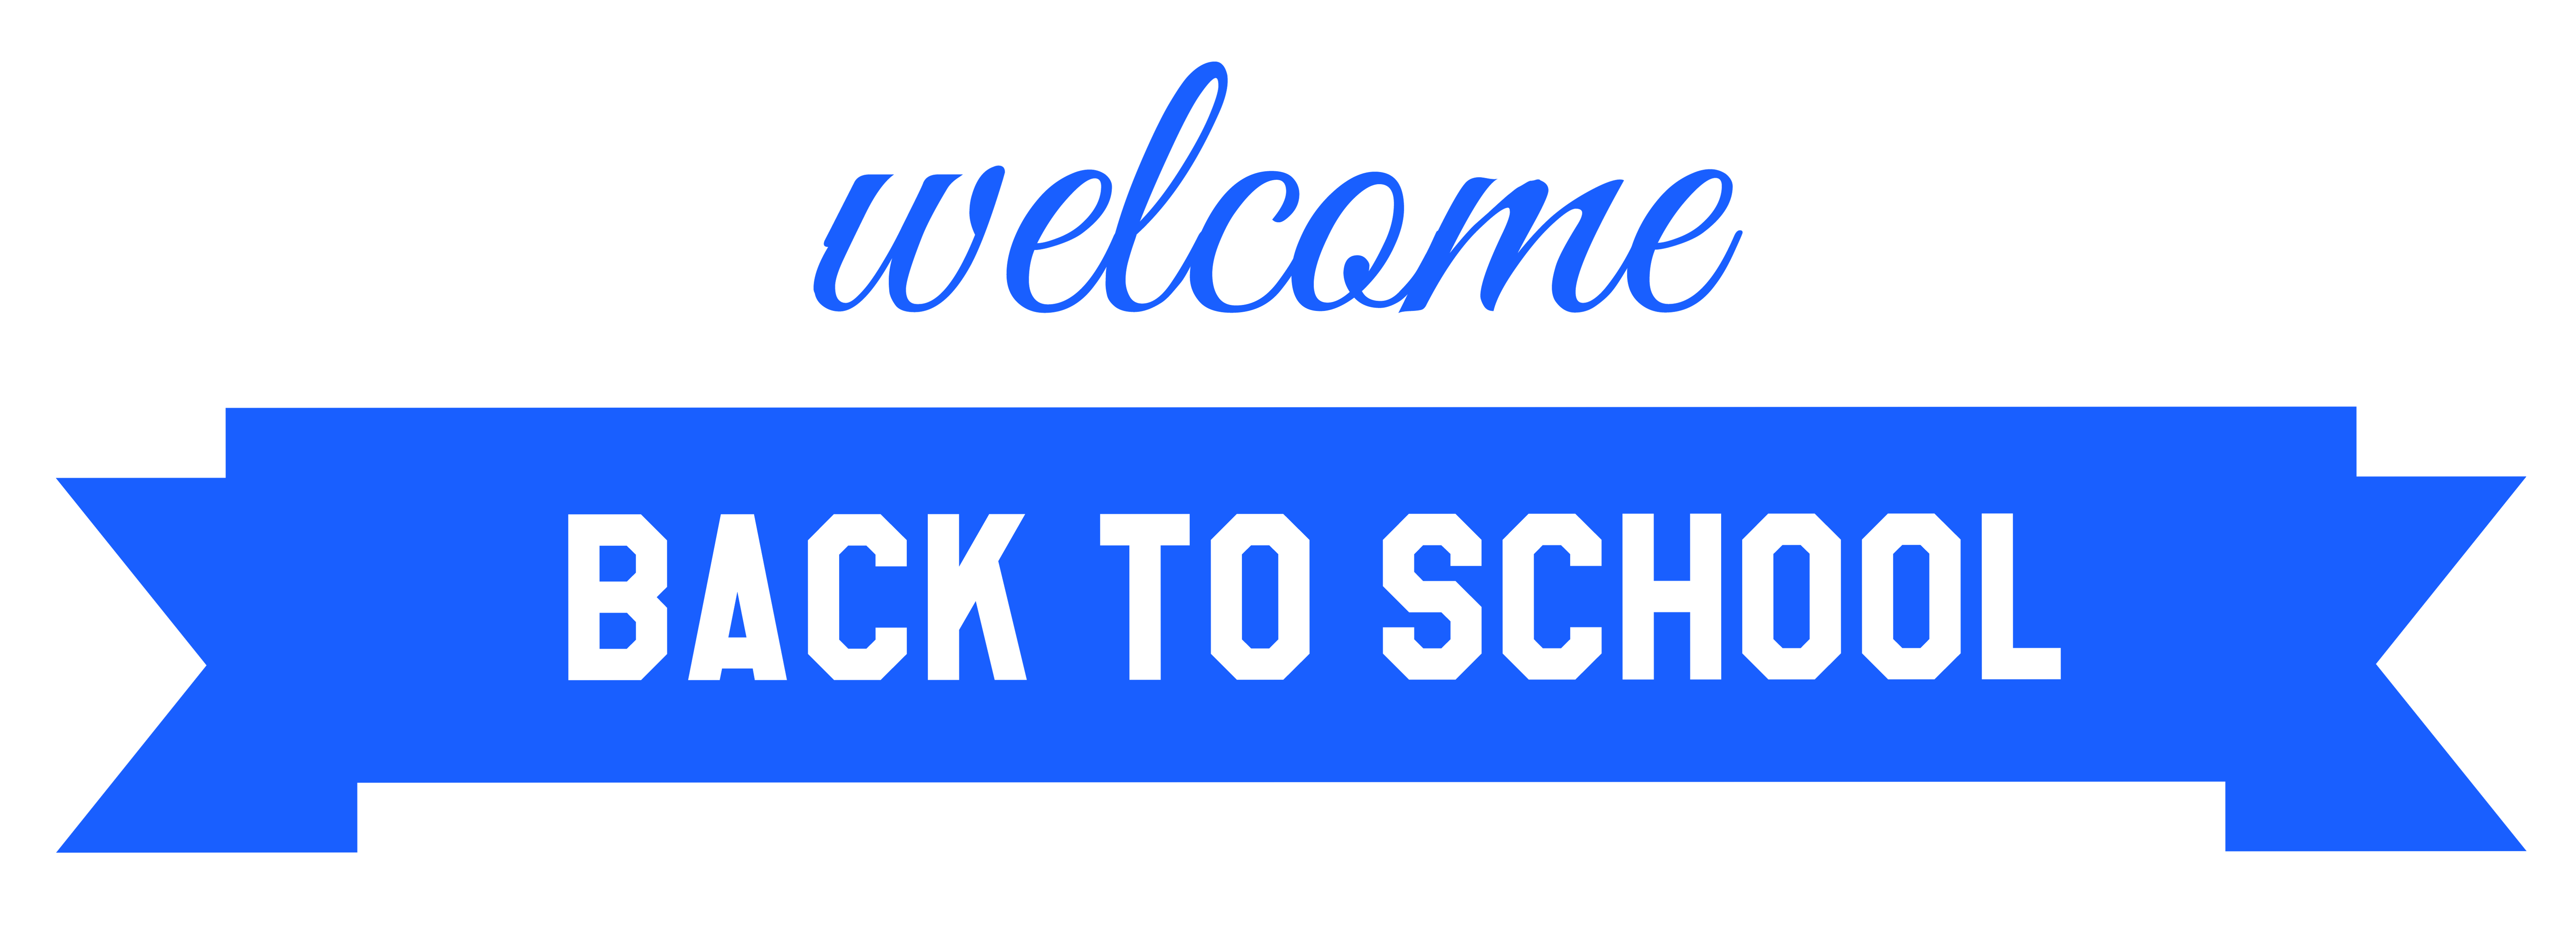 Pennant clipart school. Blue welcome back to